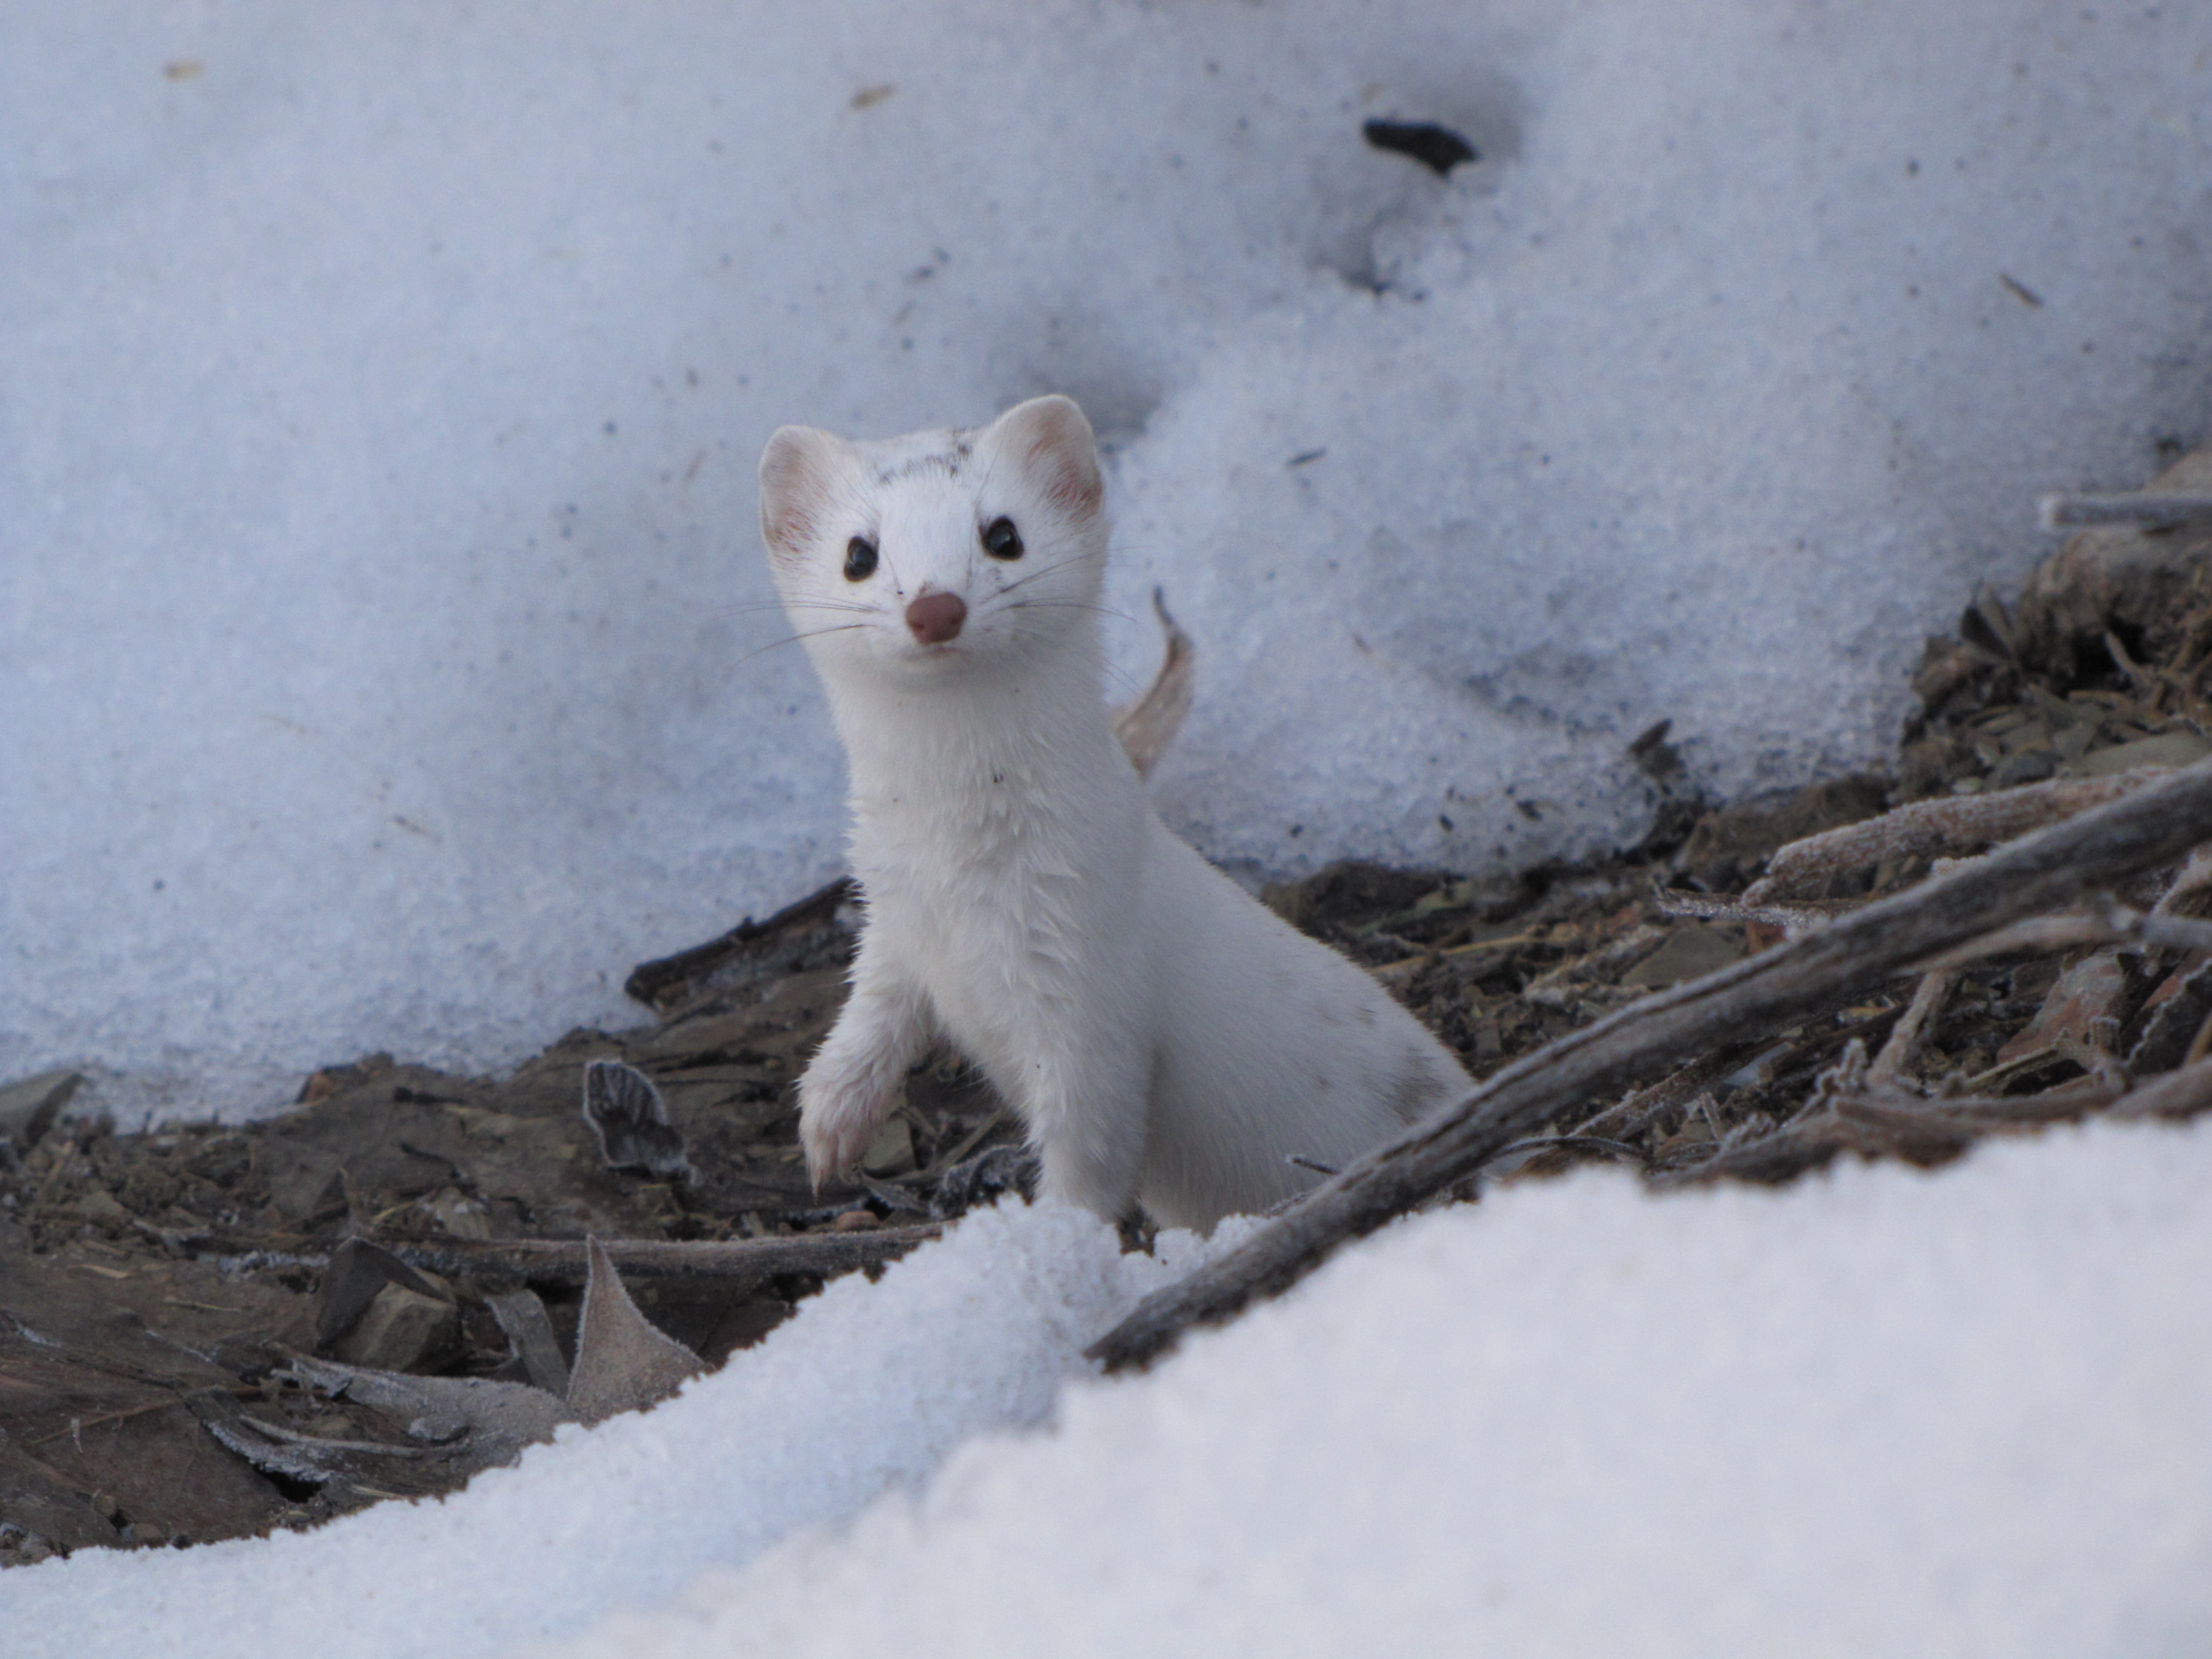 A long-tailed weasel blending in with the snow in its white winter coat